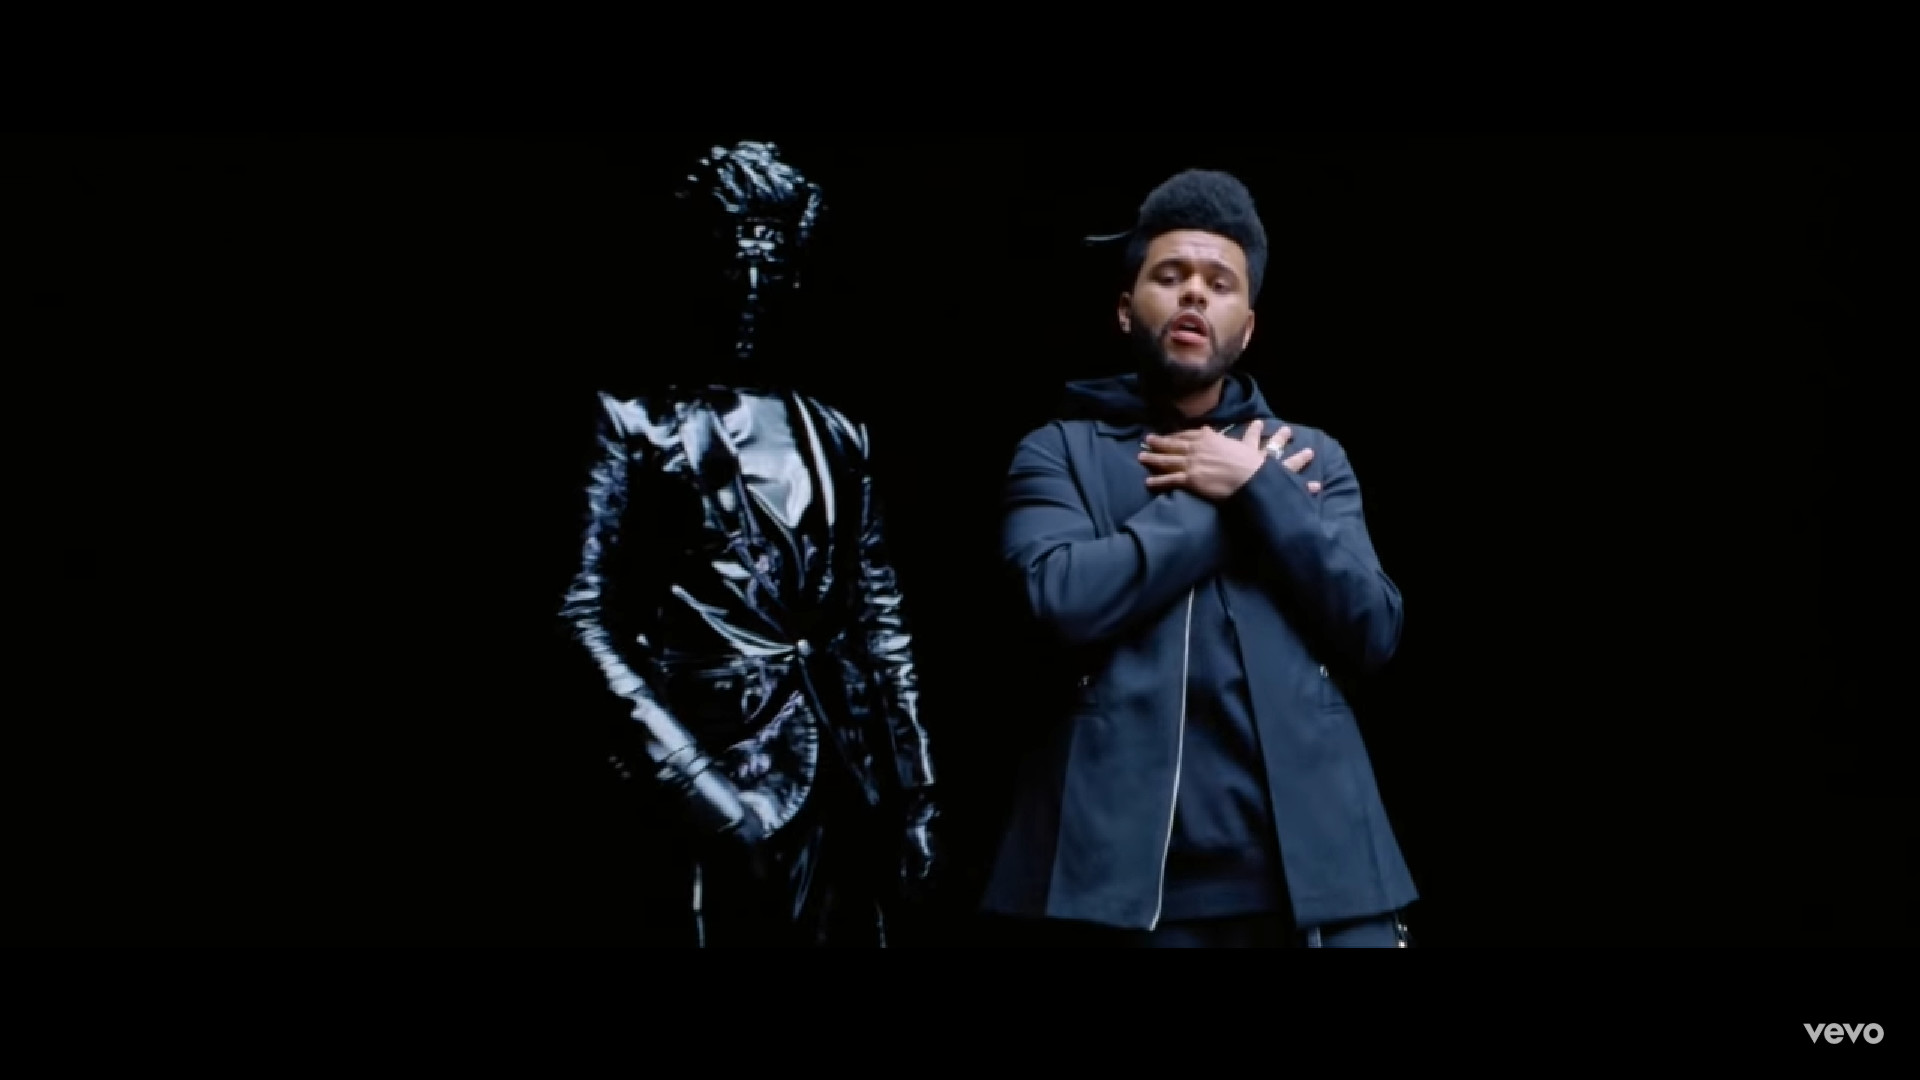 The Weeknd & Gesaffelstein Drop Of Visuals For “Lost In The Fire”